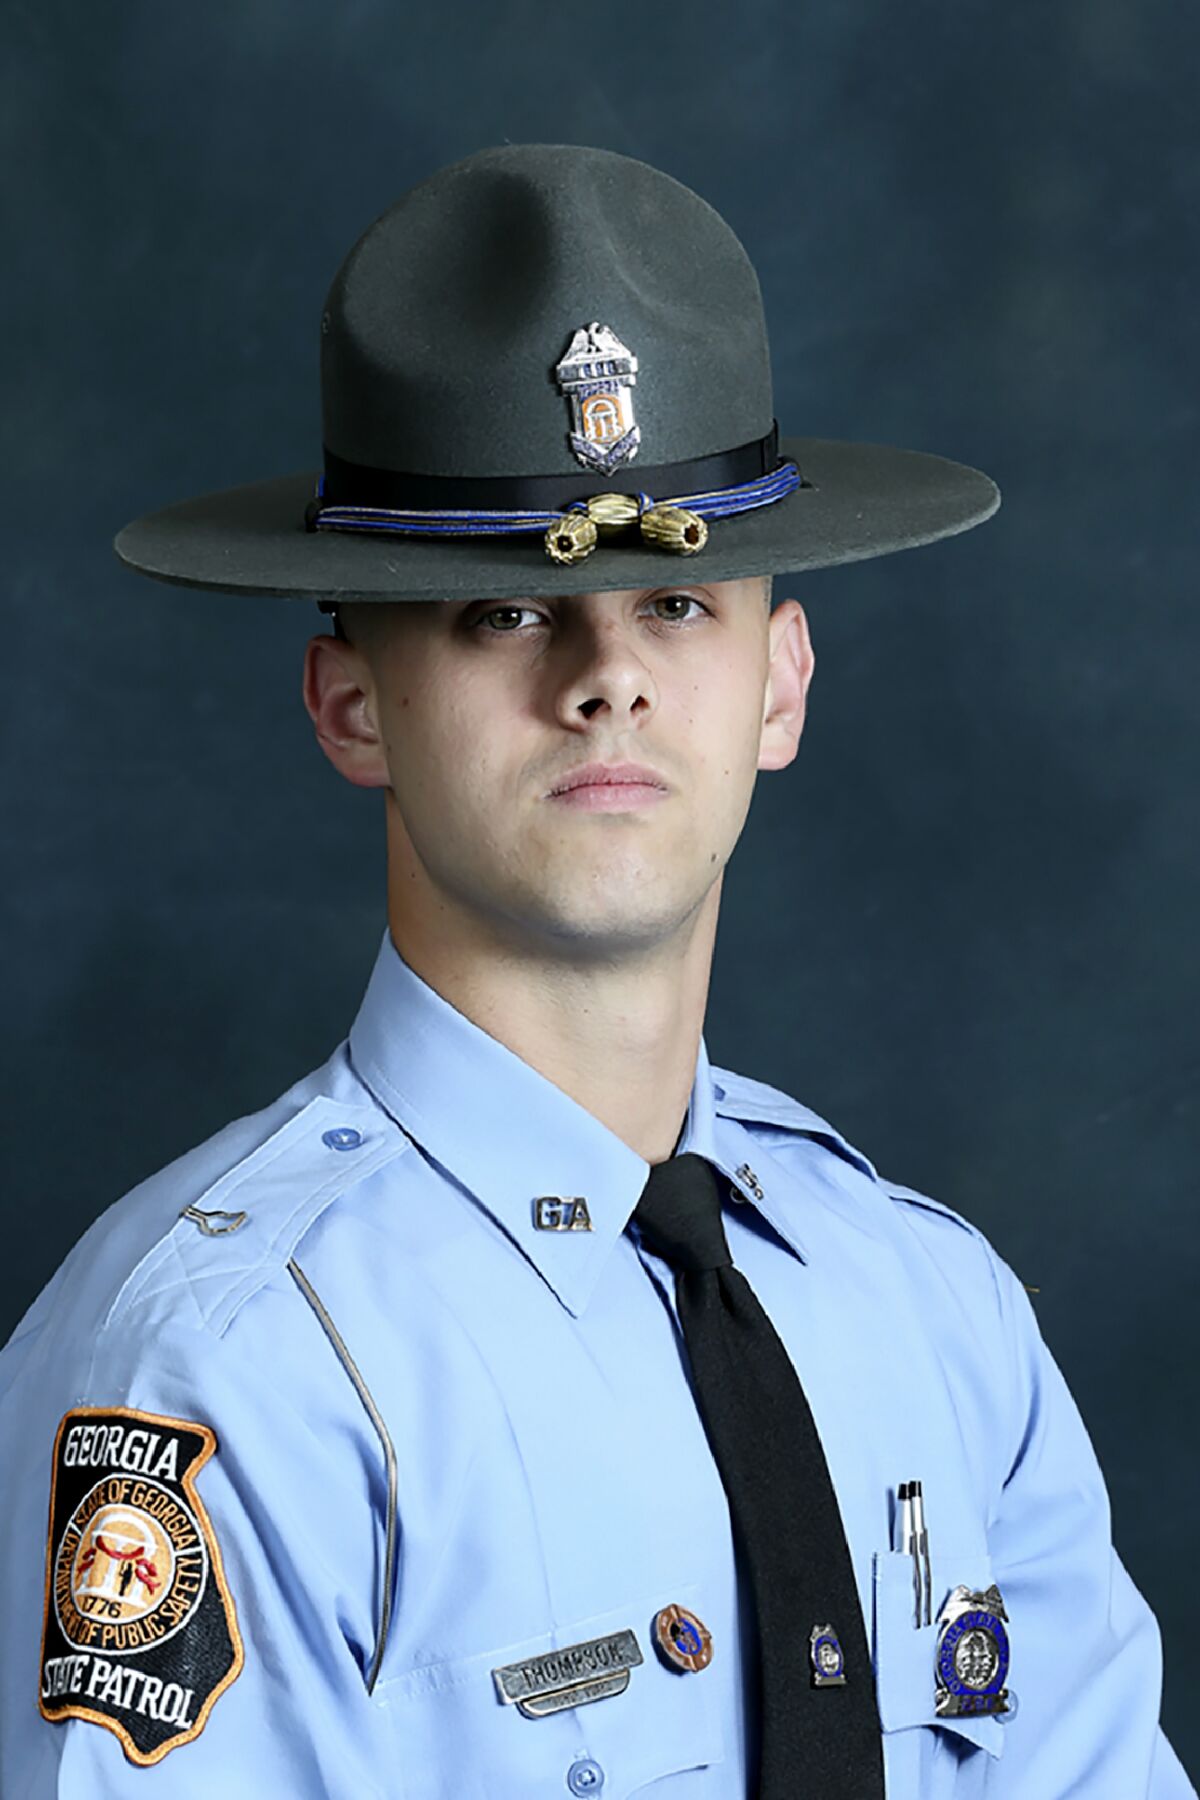 In this undated photo released by the Georgia Department of Public Safety, State trooper Jacob Gordon Thompson is seen in an official portrait. The Georgia Bureau of Investigation said in a statement Friday, Aug. 14, 2020 that Thompson was charged with felony murder and aggravated assault. The trooper has been fired and charged with murder a week after he fatally shot a 60-year-old man who attempted to flee a traffic stop. (Georgia Department of Public Safety via AP)